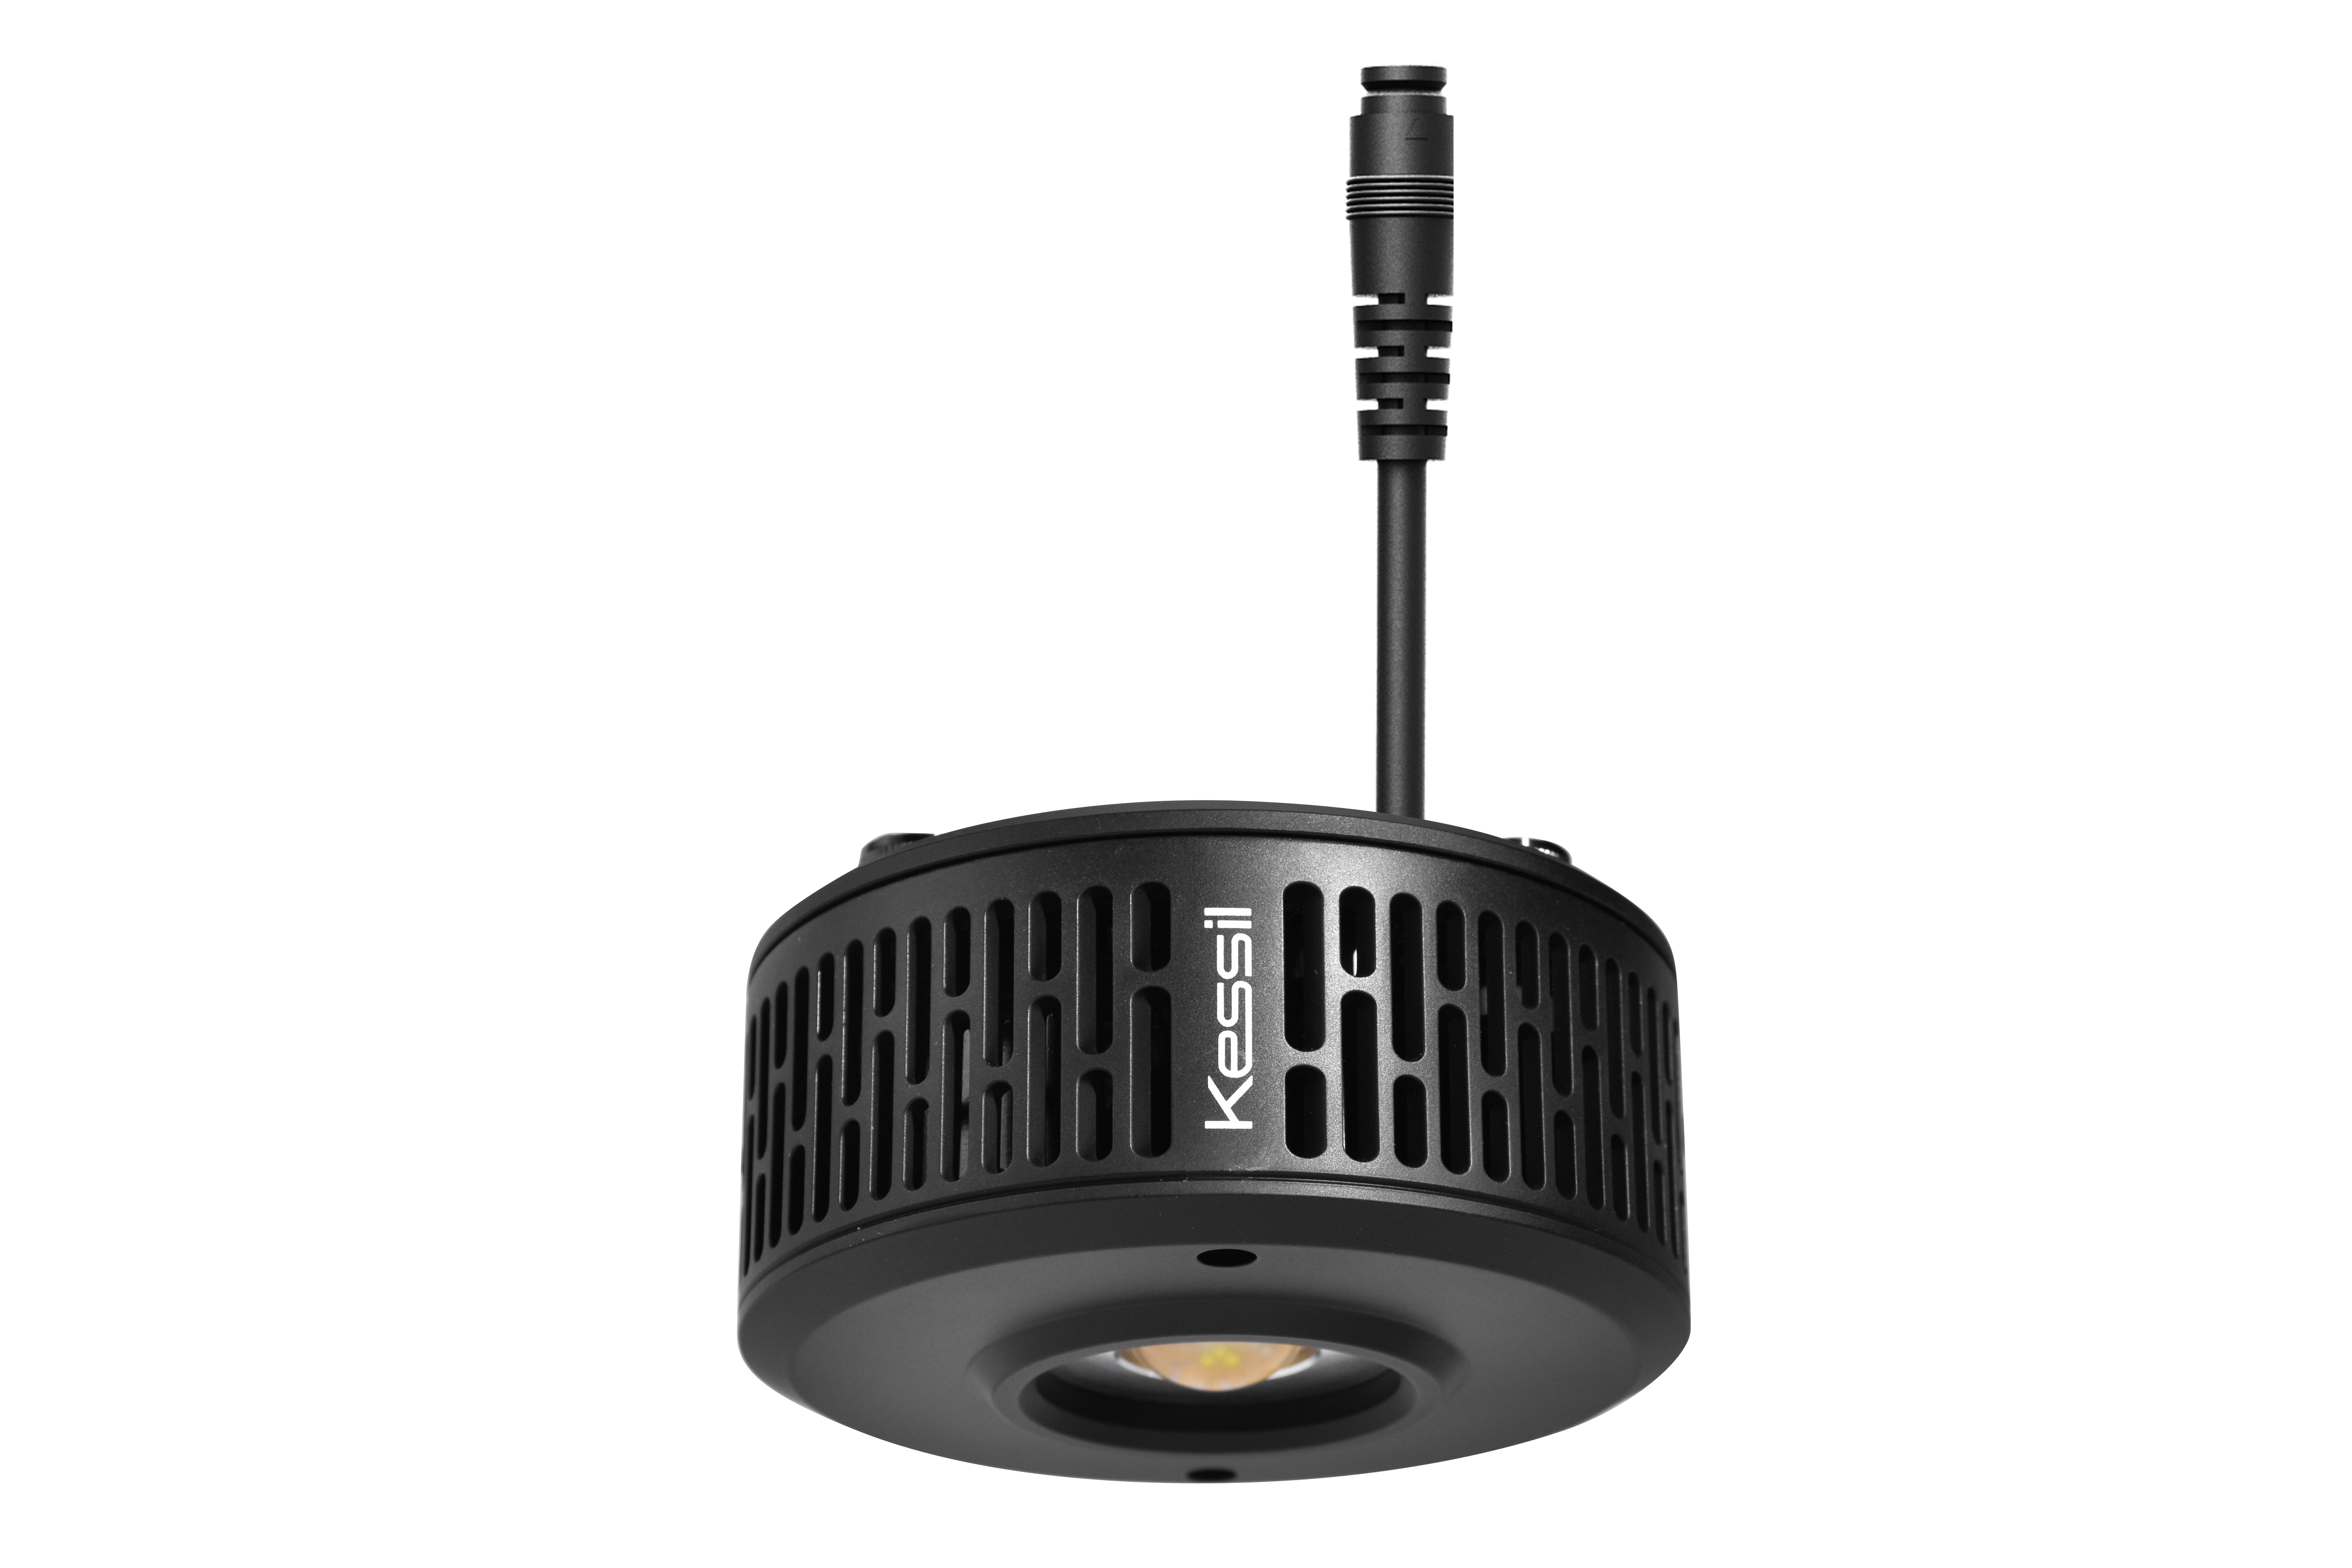 Kessil A360X LED aquarium light now available in the UK. 